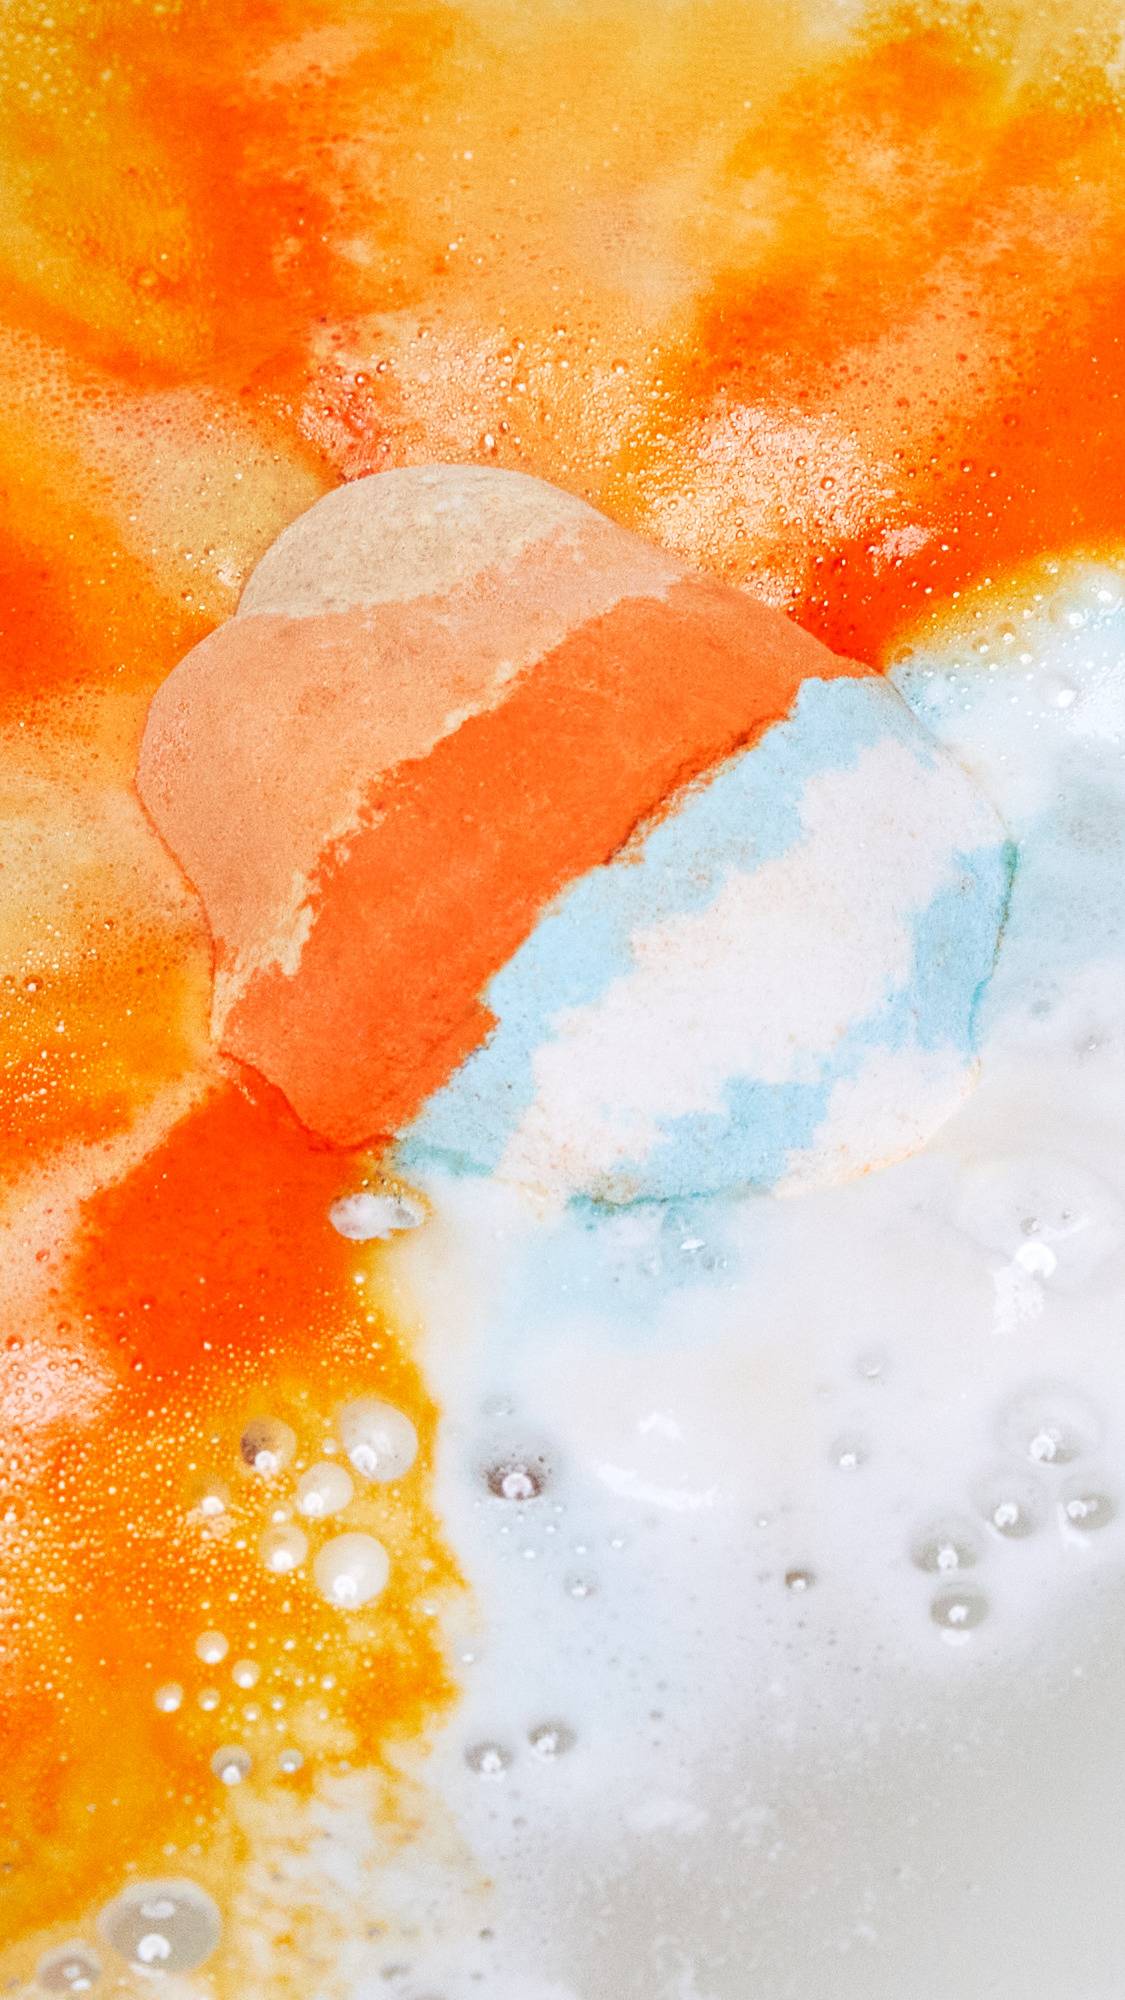 The Chelsea Morning bath bomb has just been placed into the bath water. The top half gives off vibrant, orange, foamy ripples while the bottom of the bath bomb releases delicate blue and white foamy swirls.